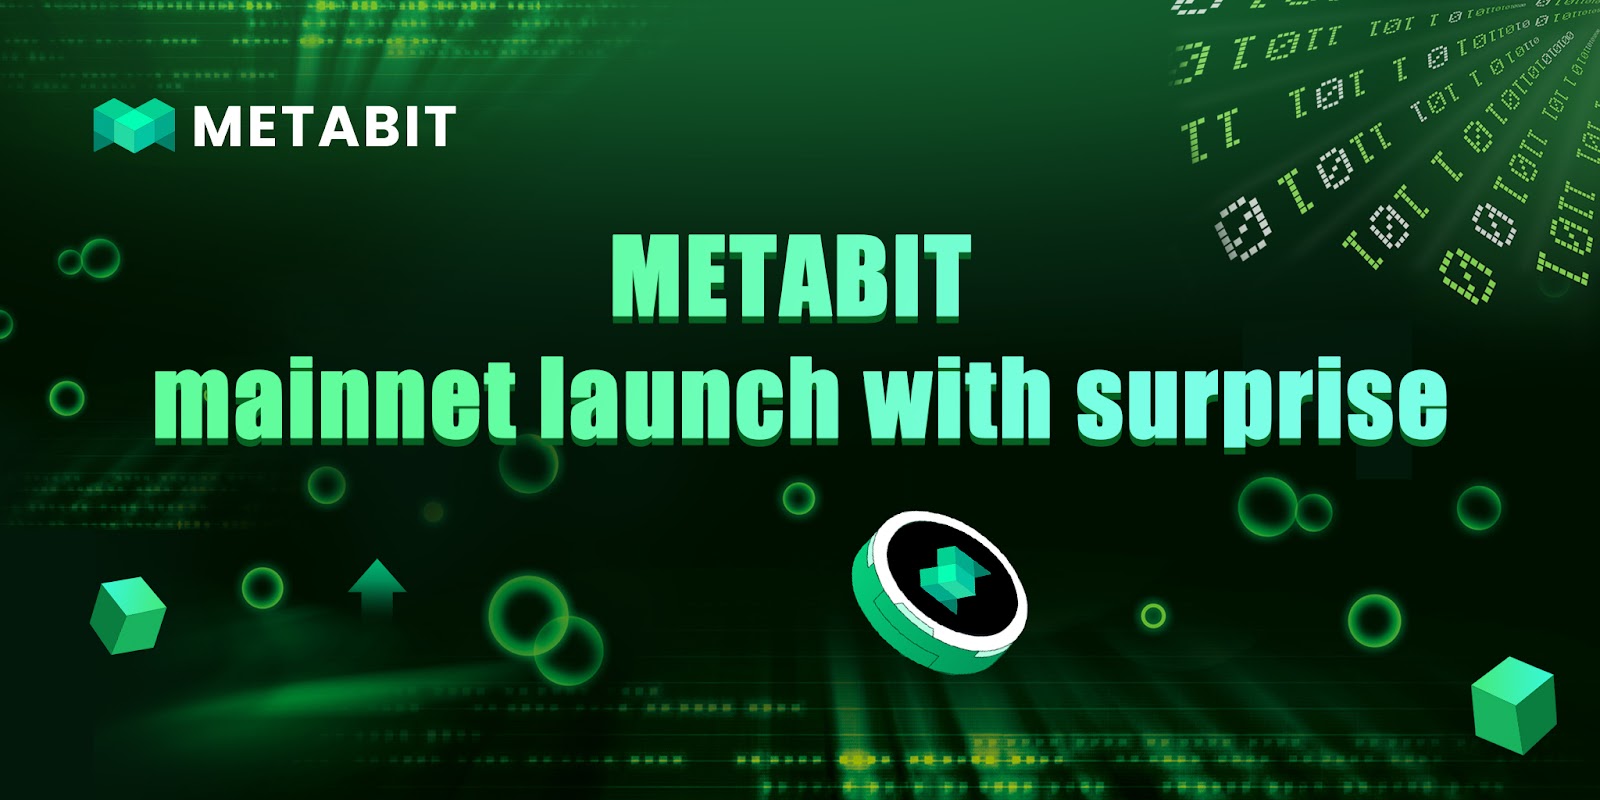 Why can METABIT, which is about to launch its mainnet, attract wide attention in the Web3 space?